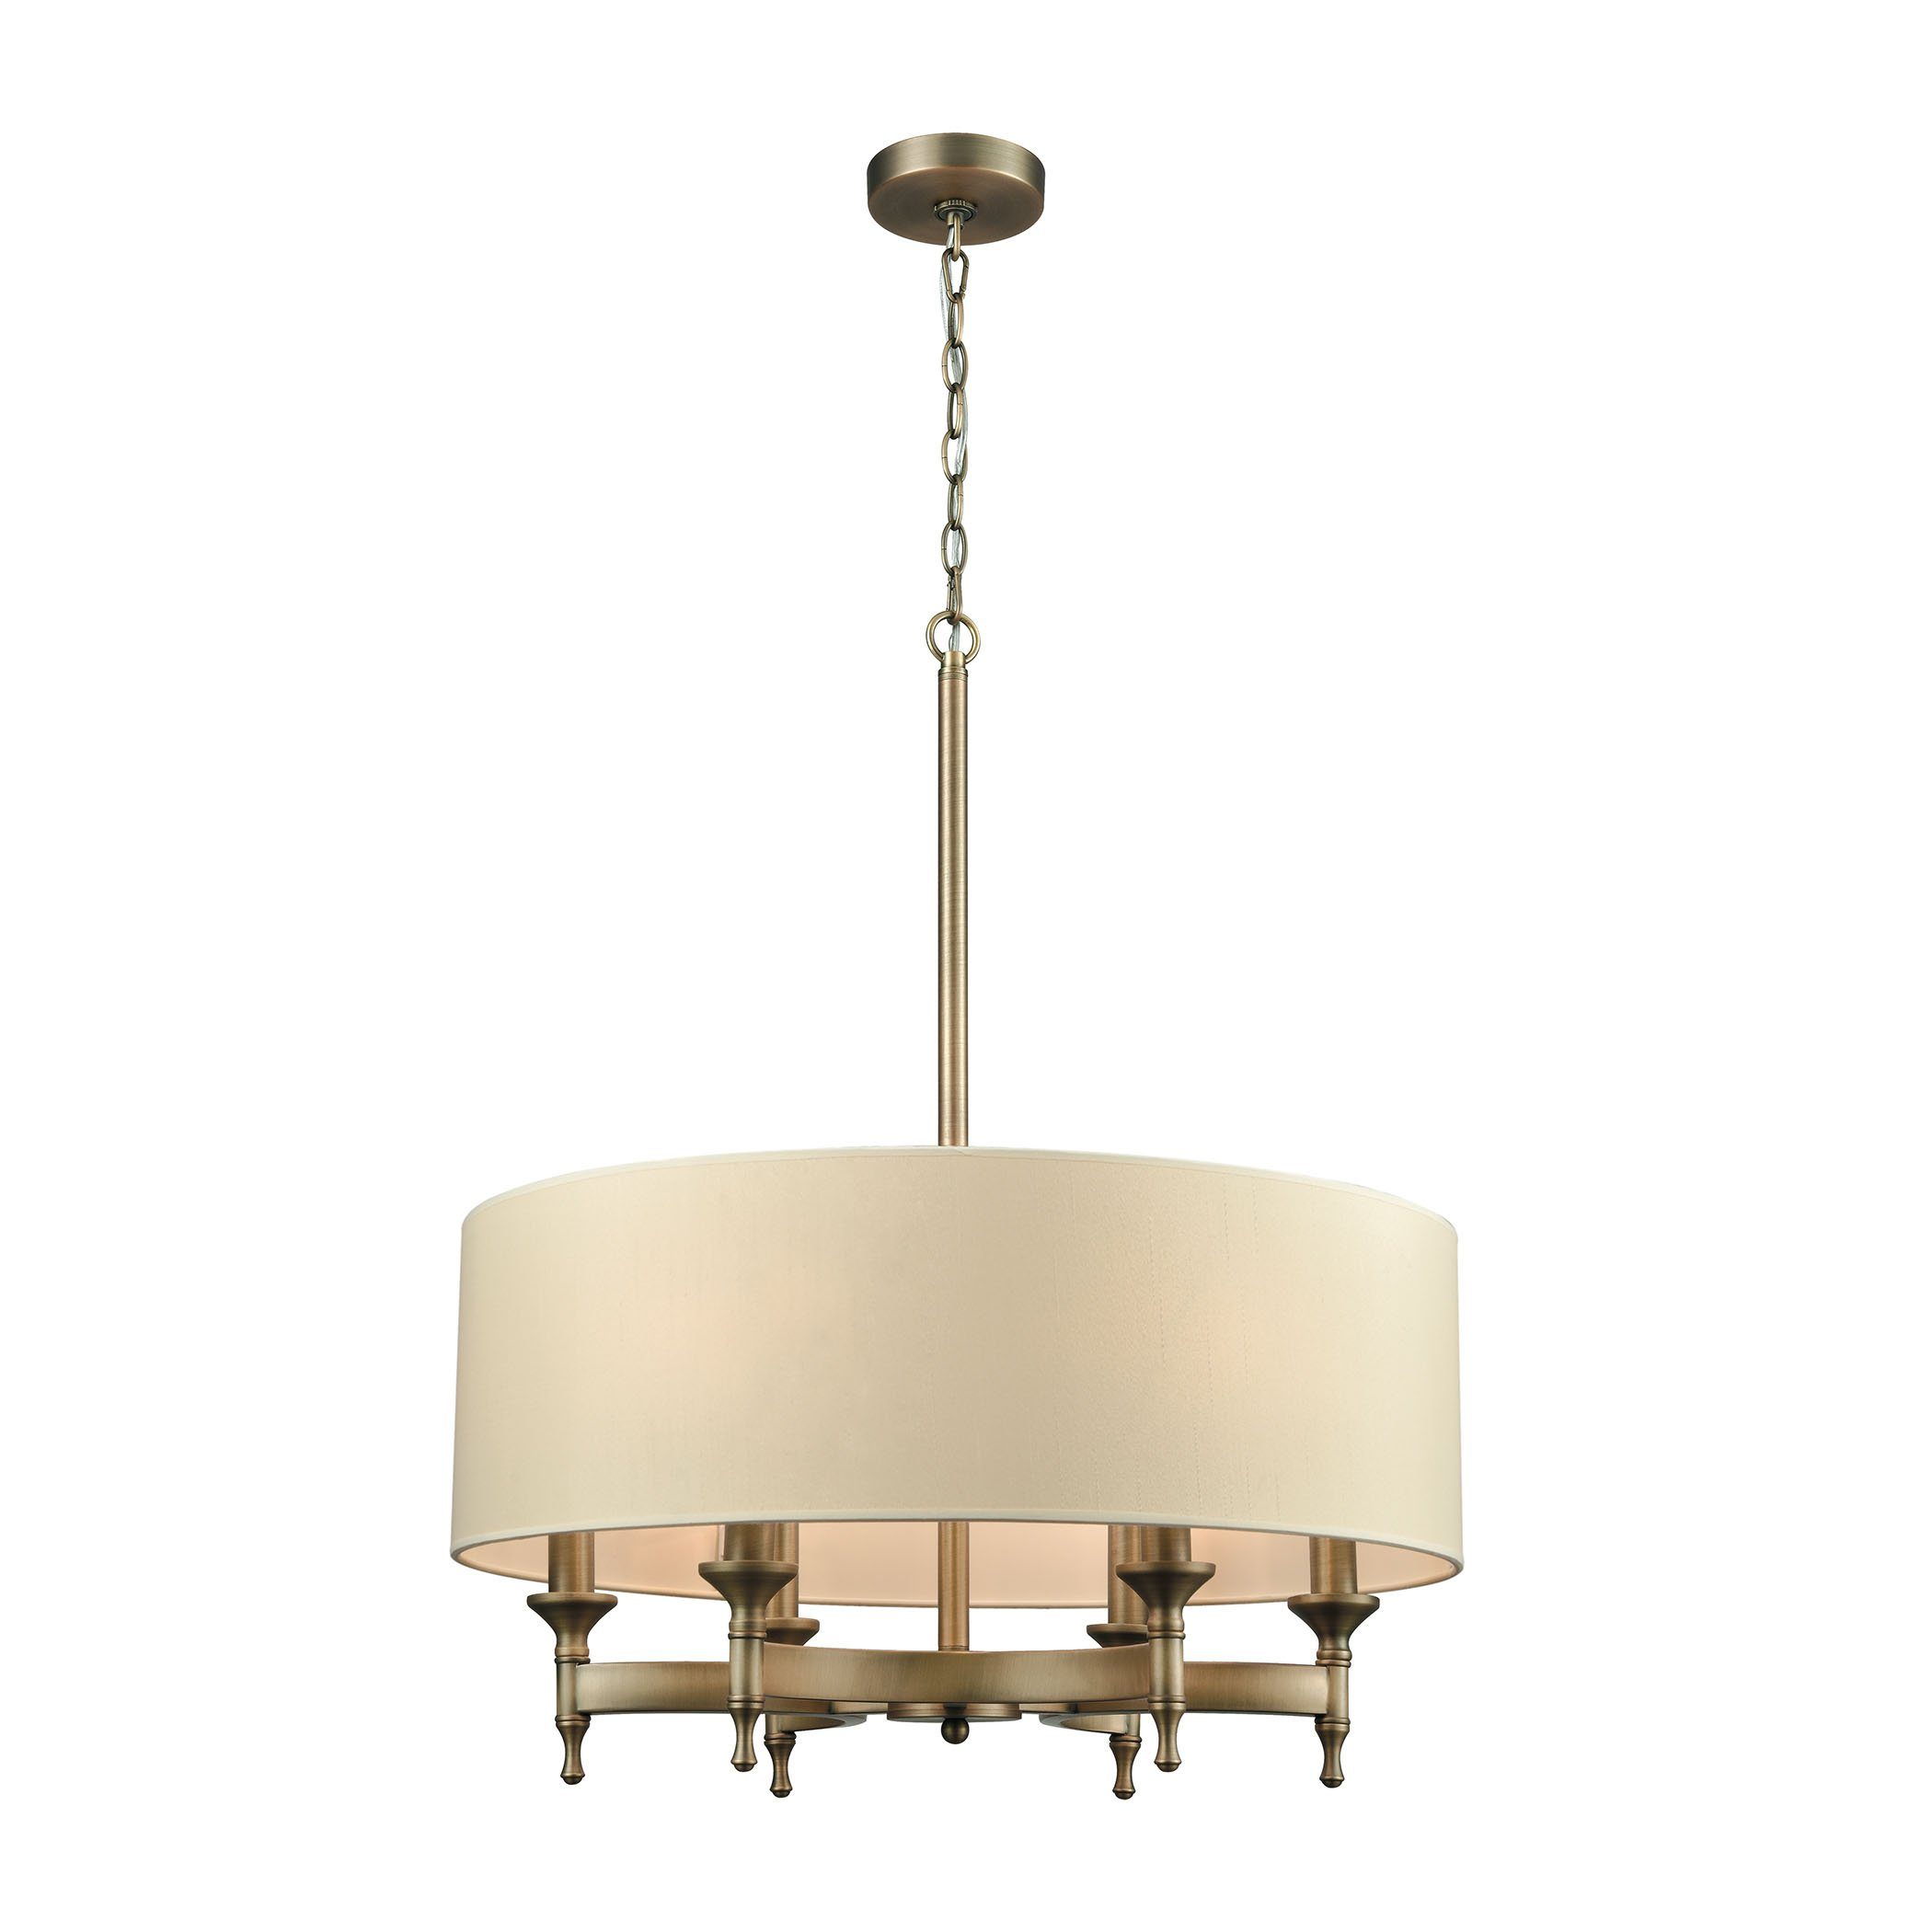 Pembroke 6 Light Chandelier In Brushed Antique Brass With A Light Tan Fabric Shade Ceiling Elk Lighting 